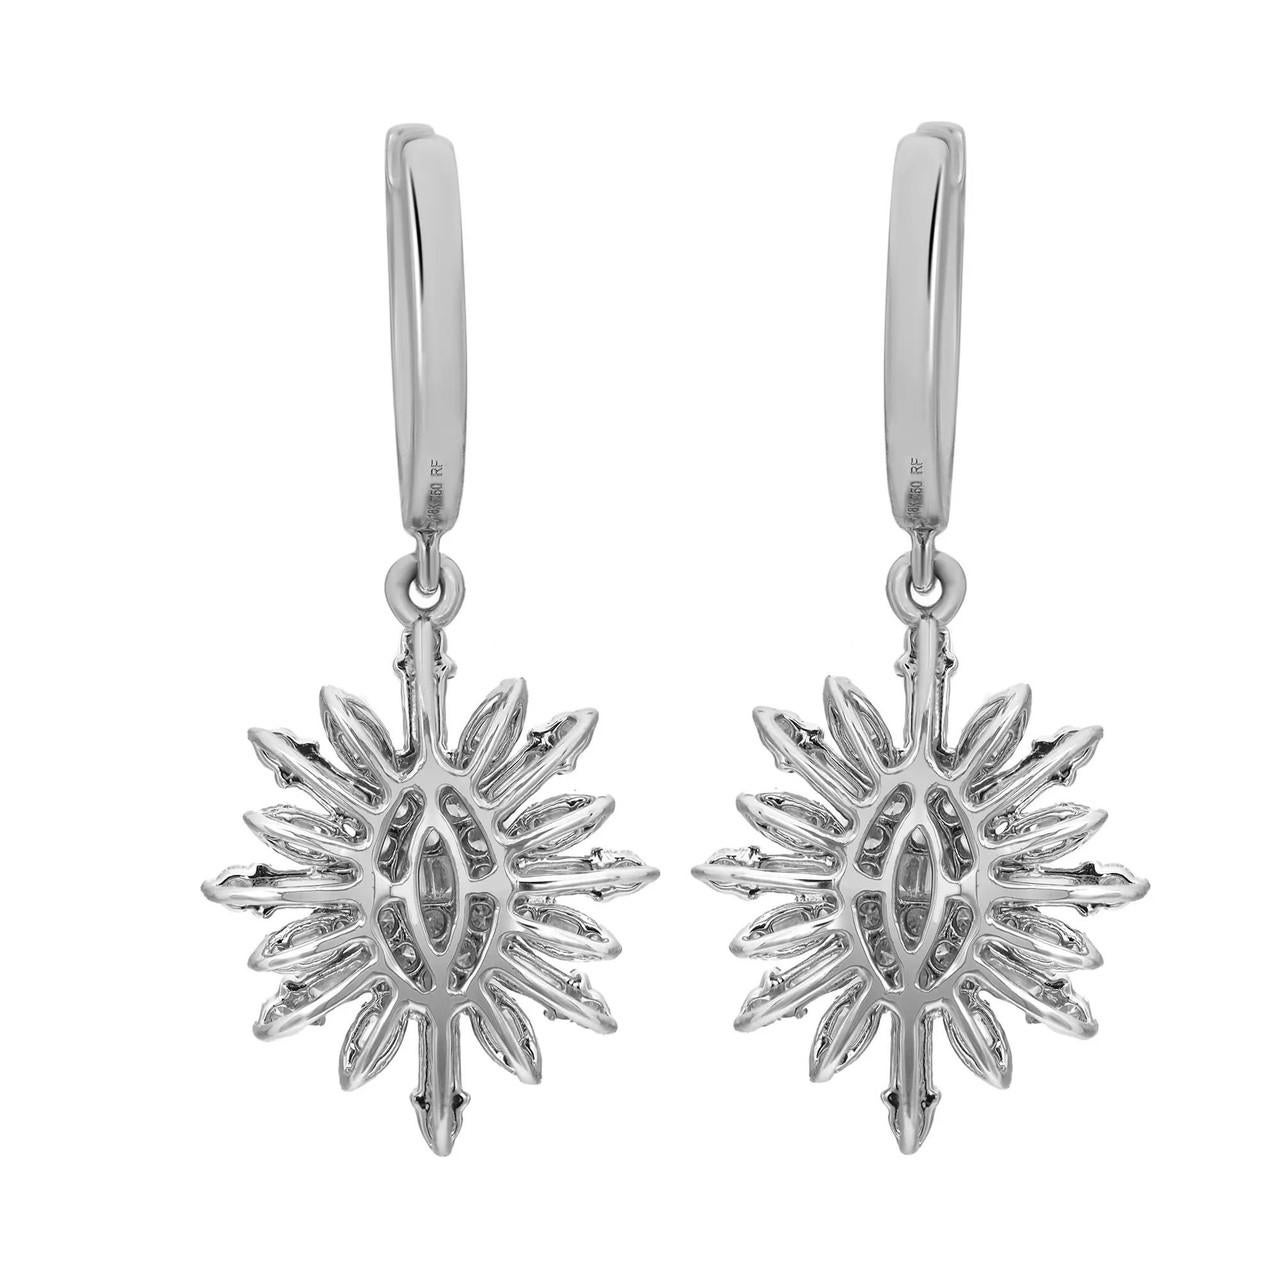 
Indulge in sophistication with these chic diamond drop earrings, meticulously fashioned in luxurious 18K white gold. Their allure is heightened by a captivating arrangement of sparkling baguette and round brilliant cut diamonds, expertly set in a